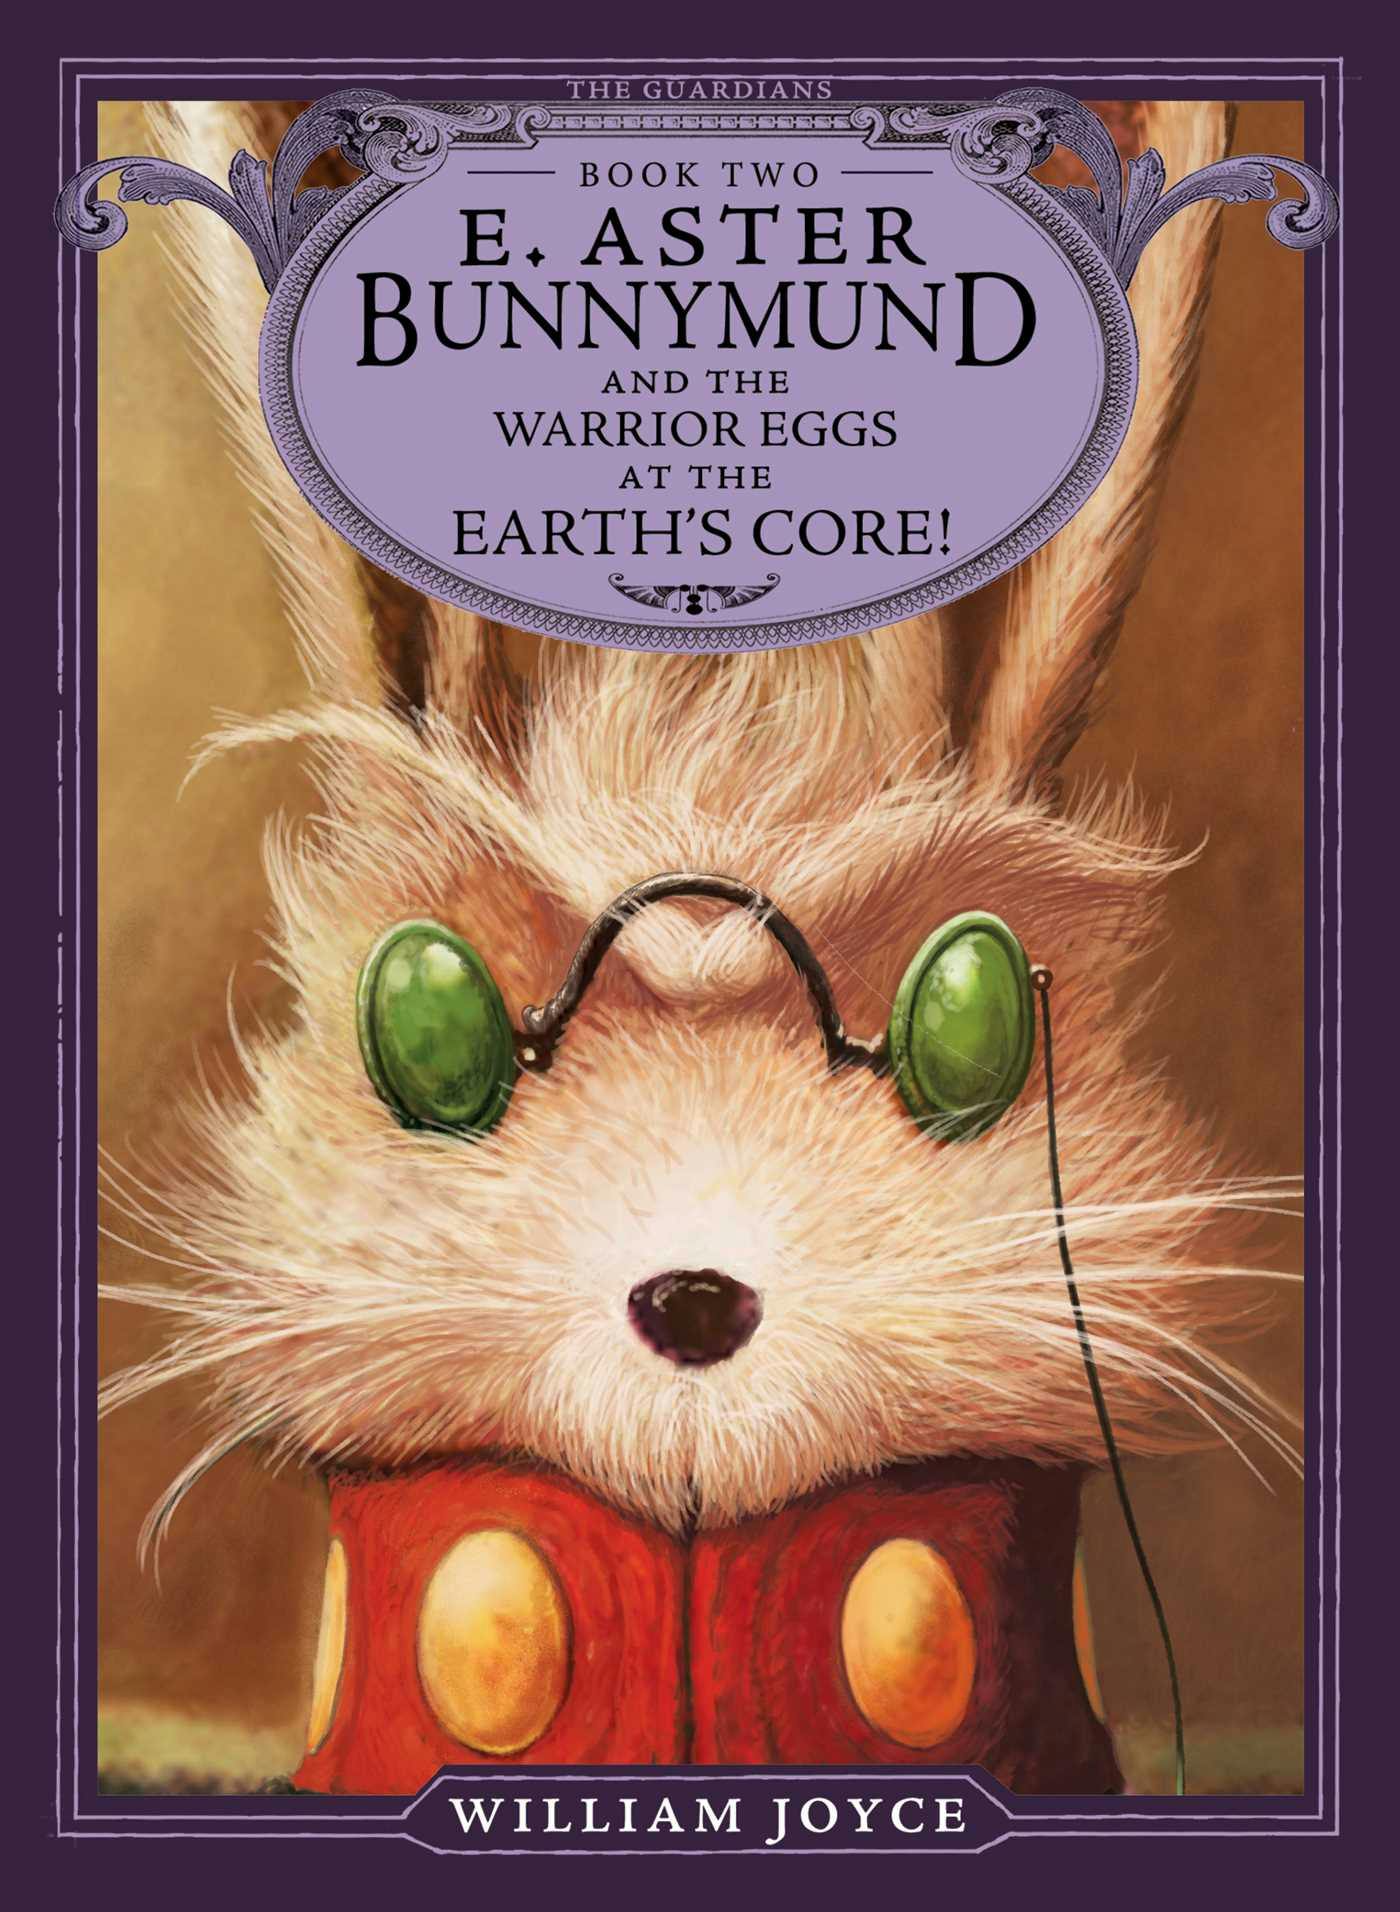 E. Aster Bunnymund and the Warrior Eggs at the Earth's Core! - undefined